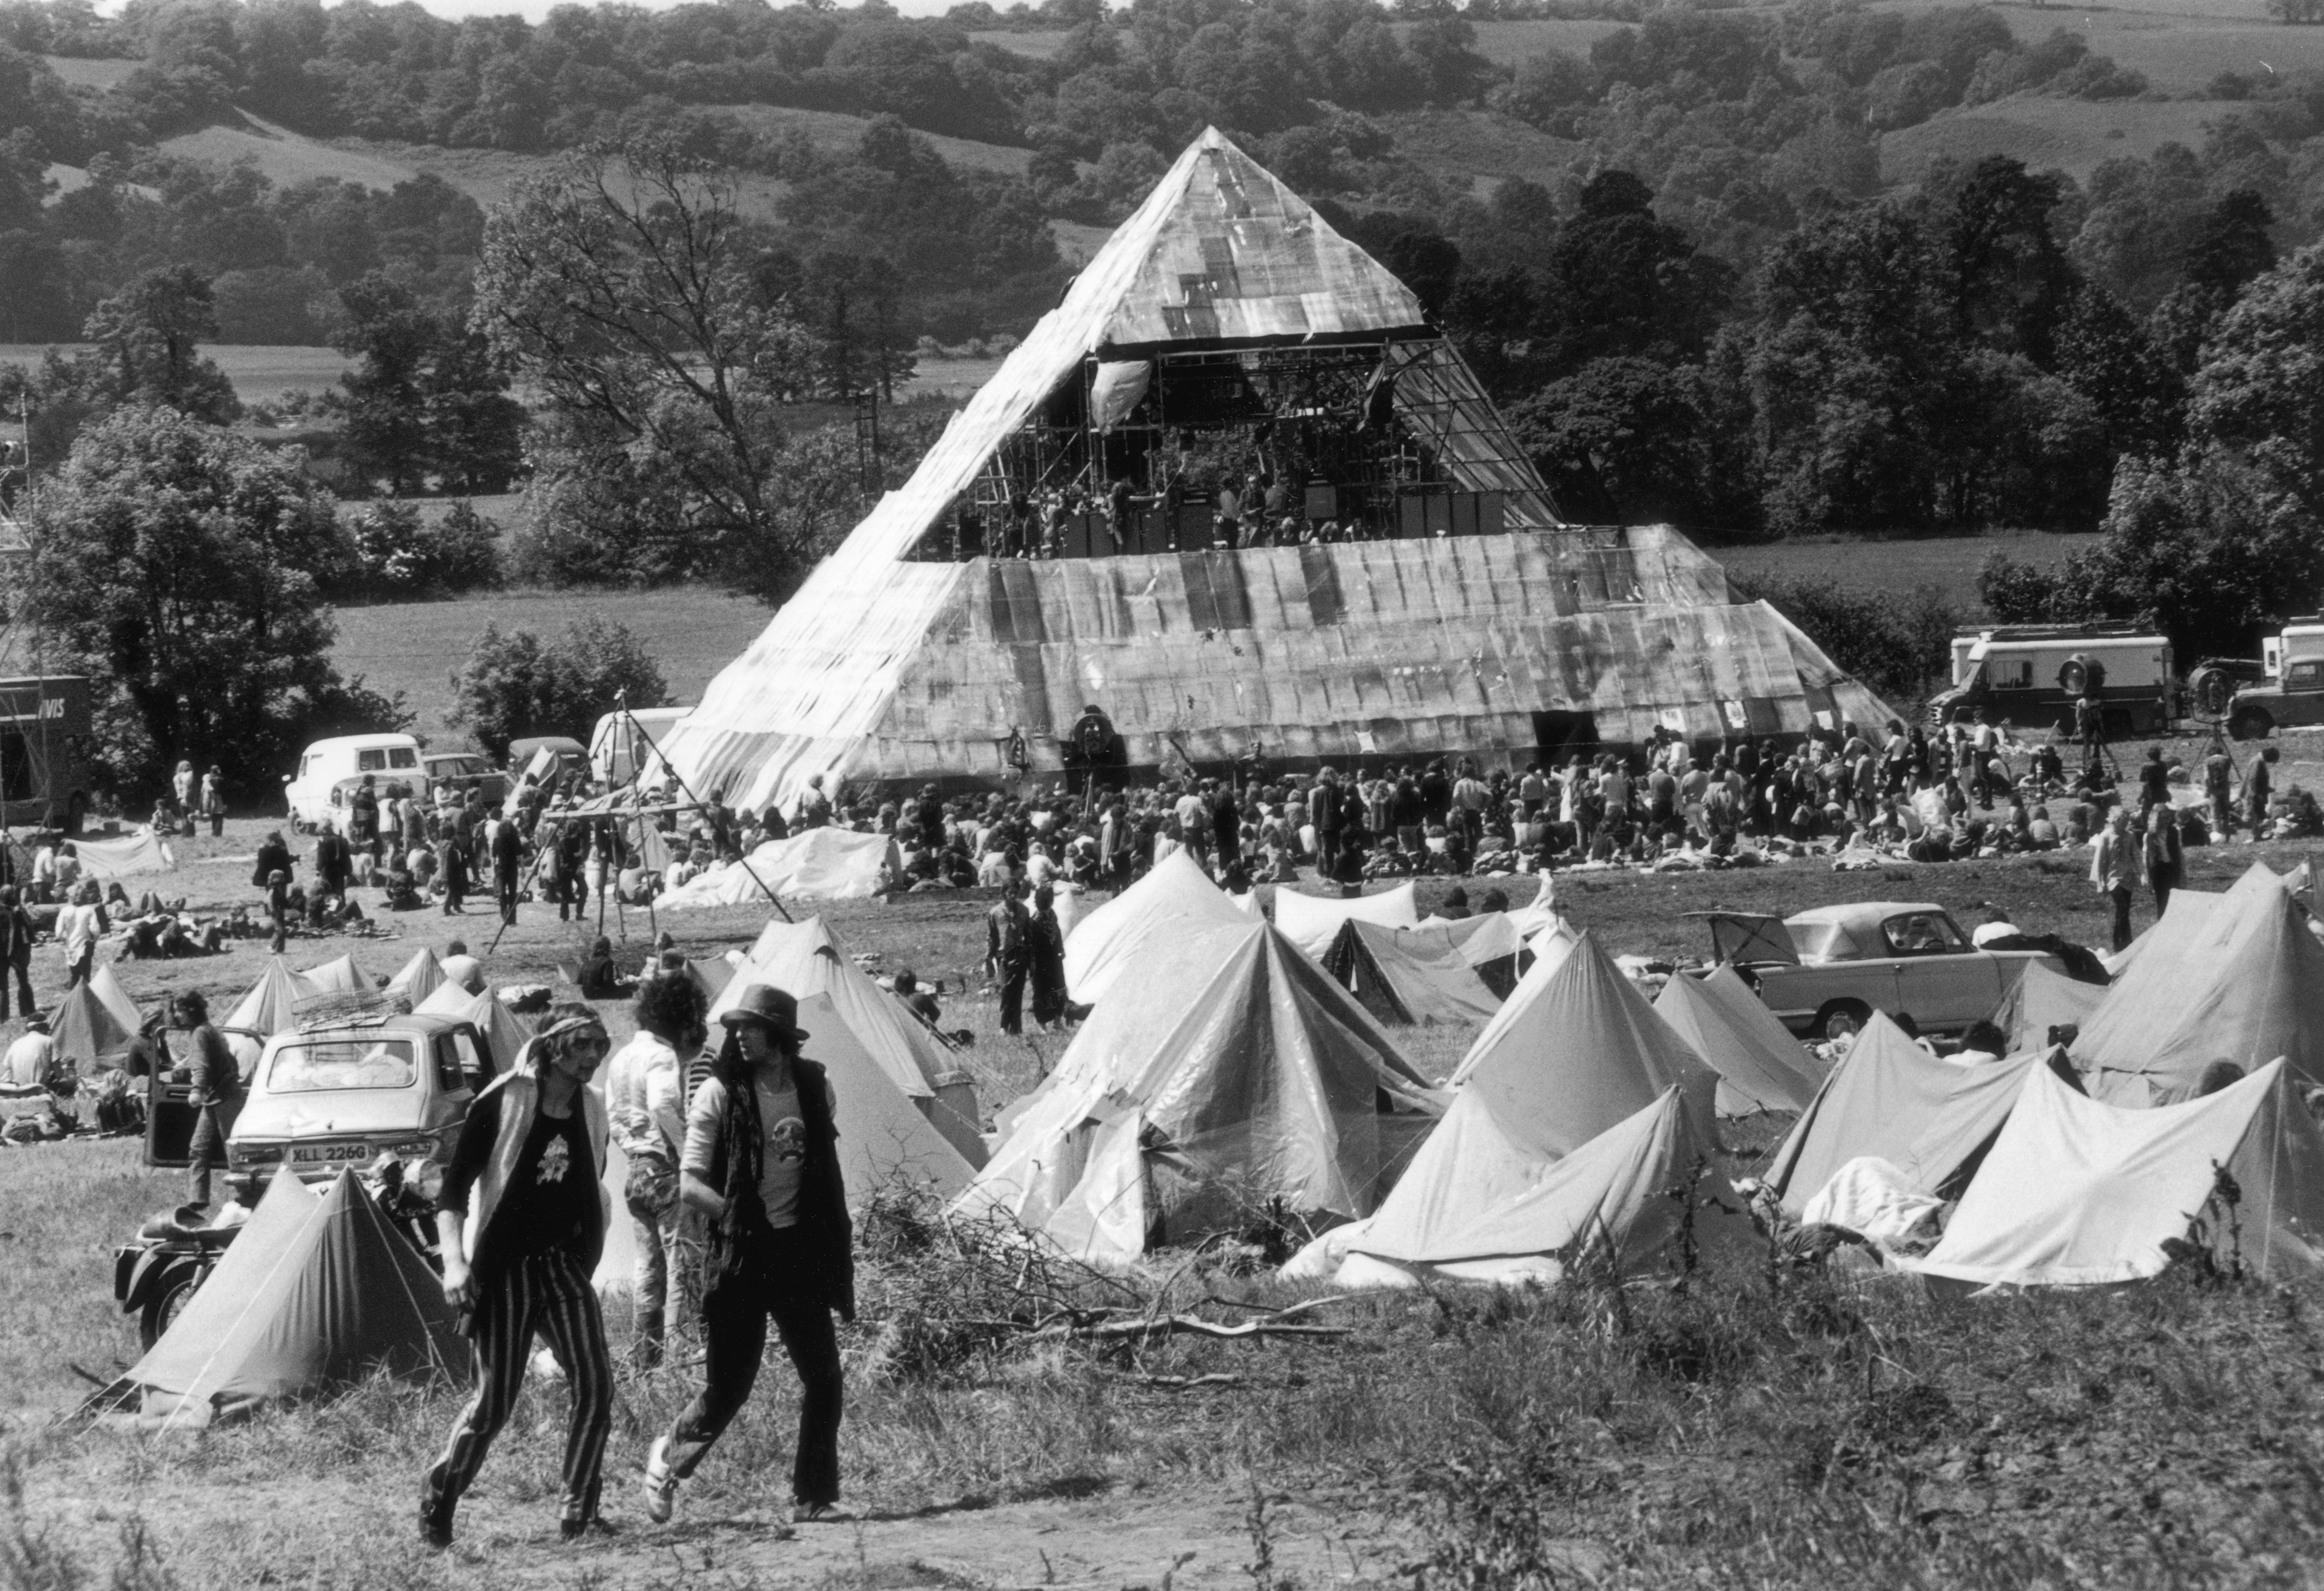 June 1971: Hippies at the second Glastonbury Festival, which saw the first use of a pyramid stage